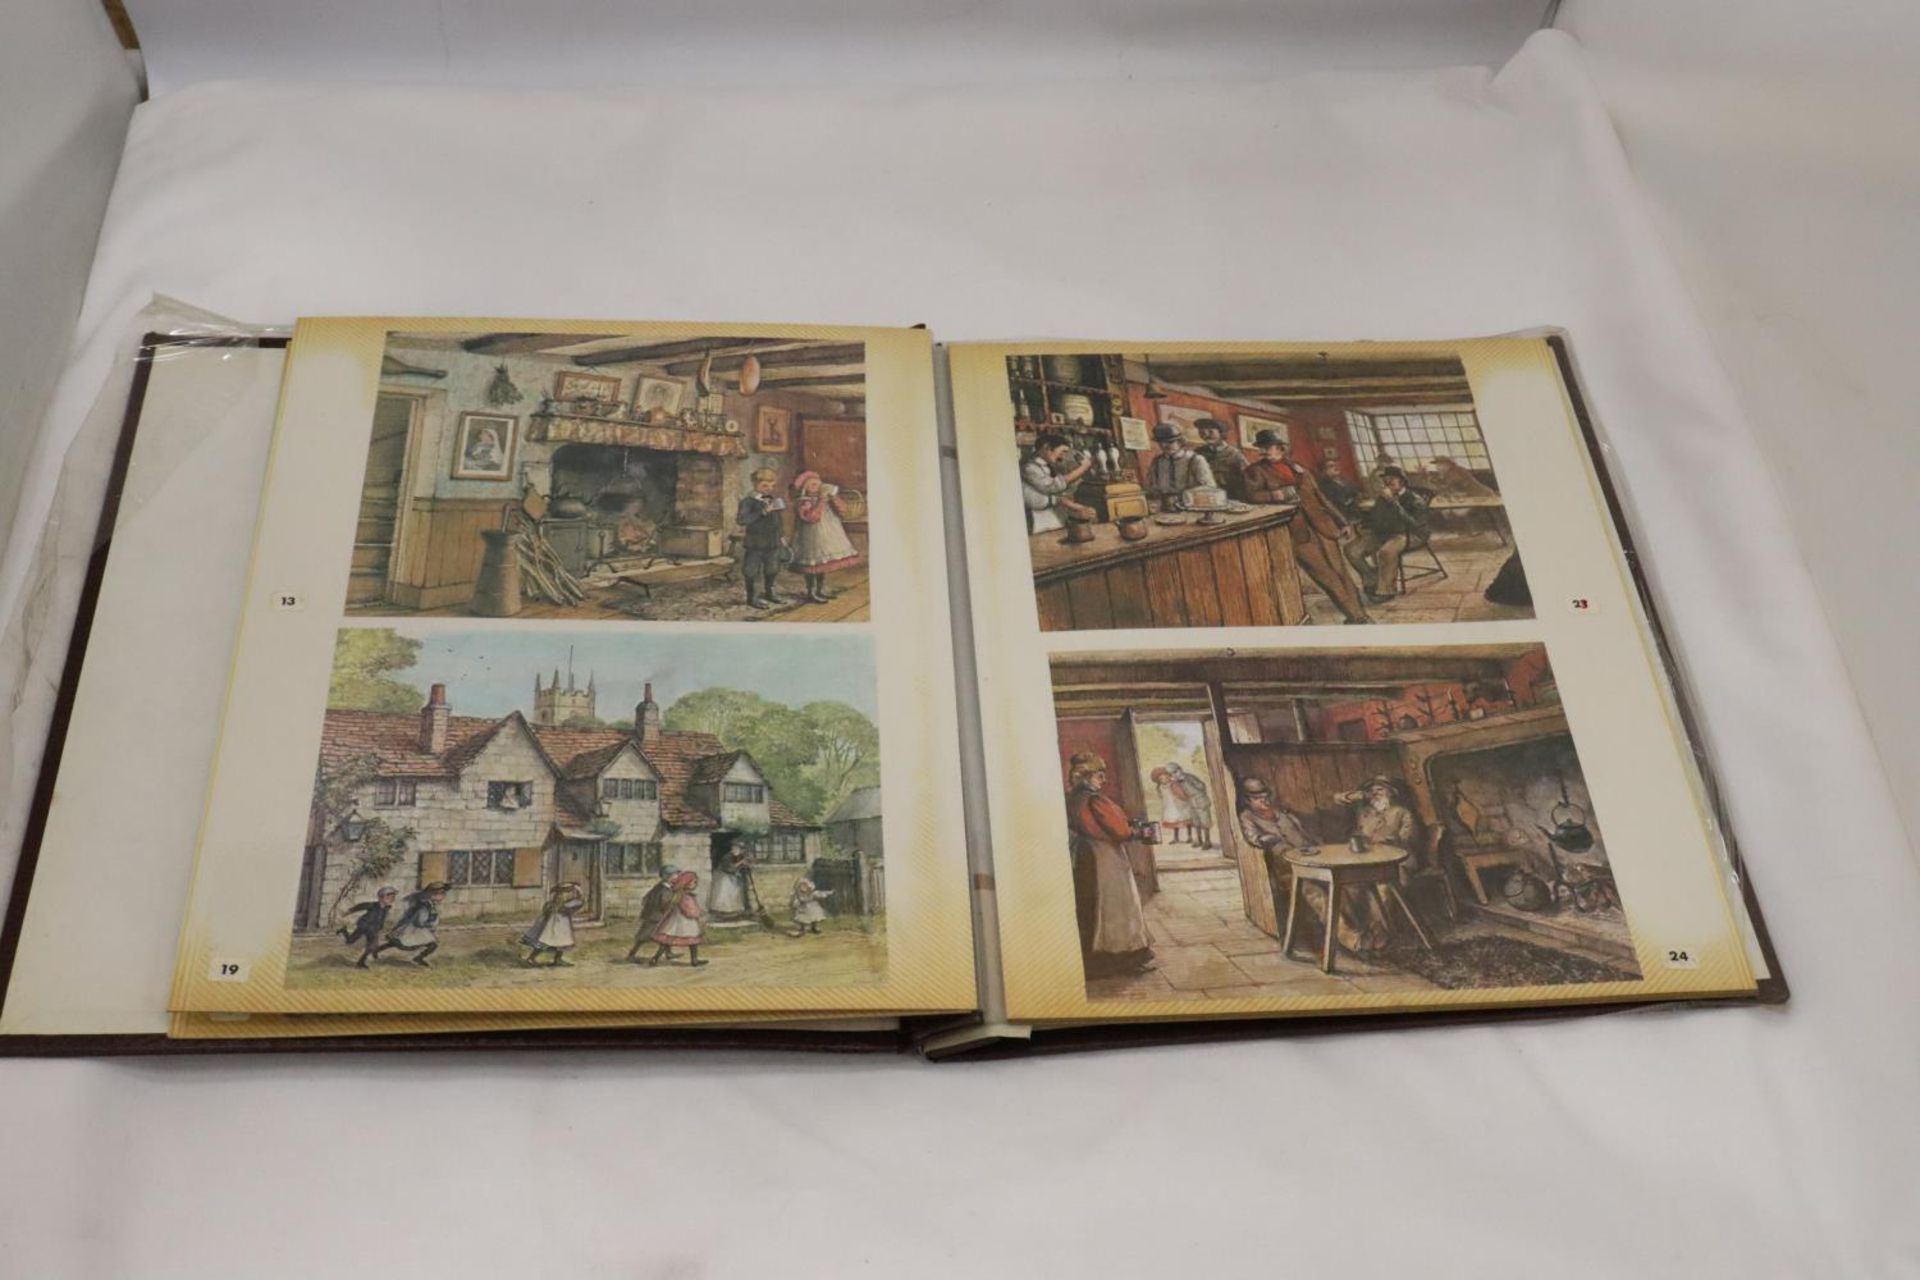 AN ALBUM CONTAINING A COLLECTION OF VINATAGE STYLE POSTCARDS DEPICTING VICTORIAN LIFE - Image 3 of 4